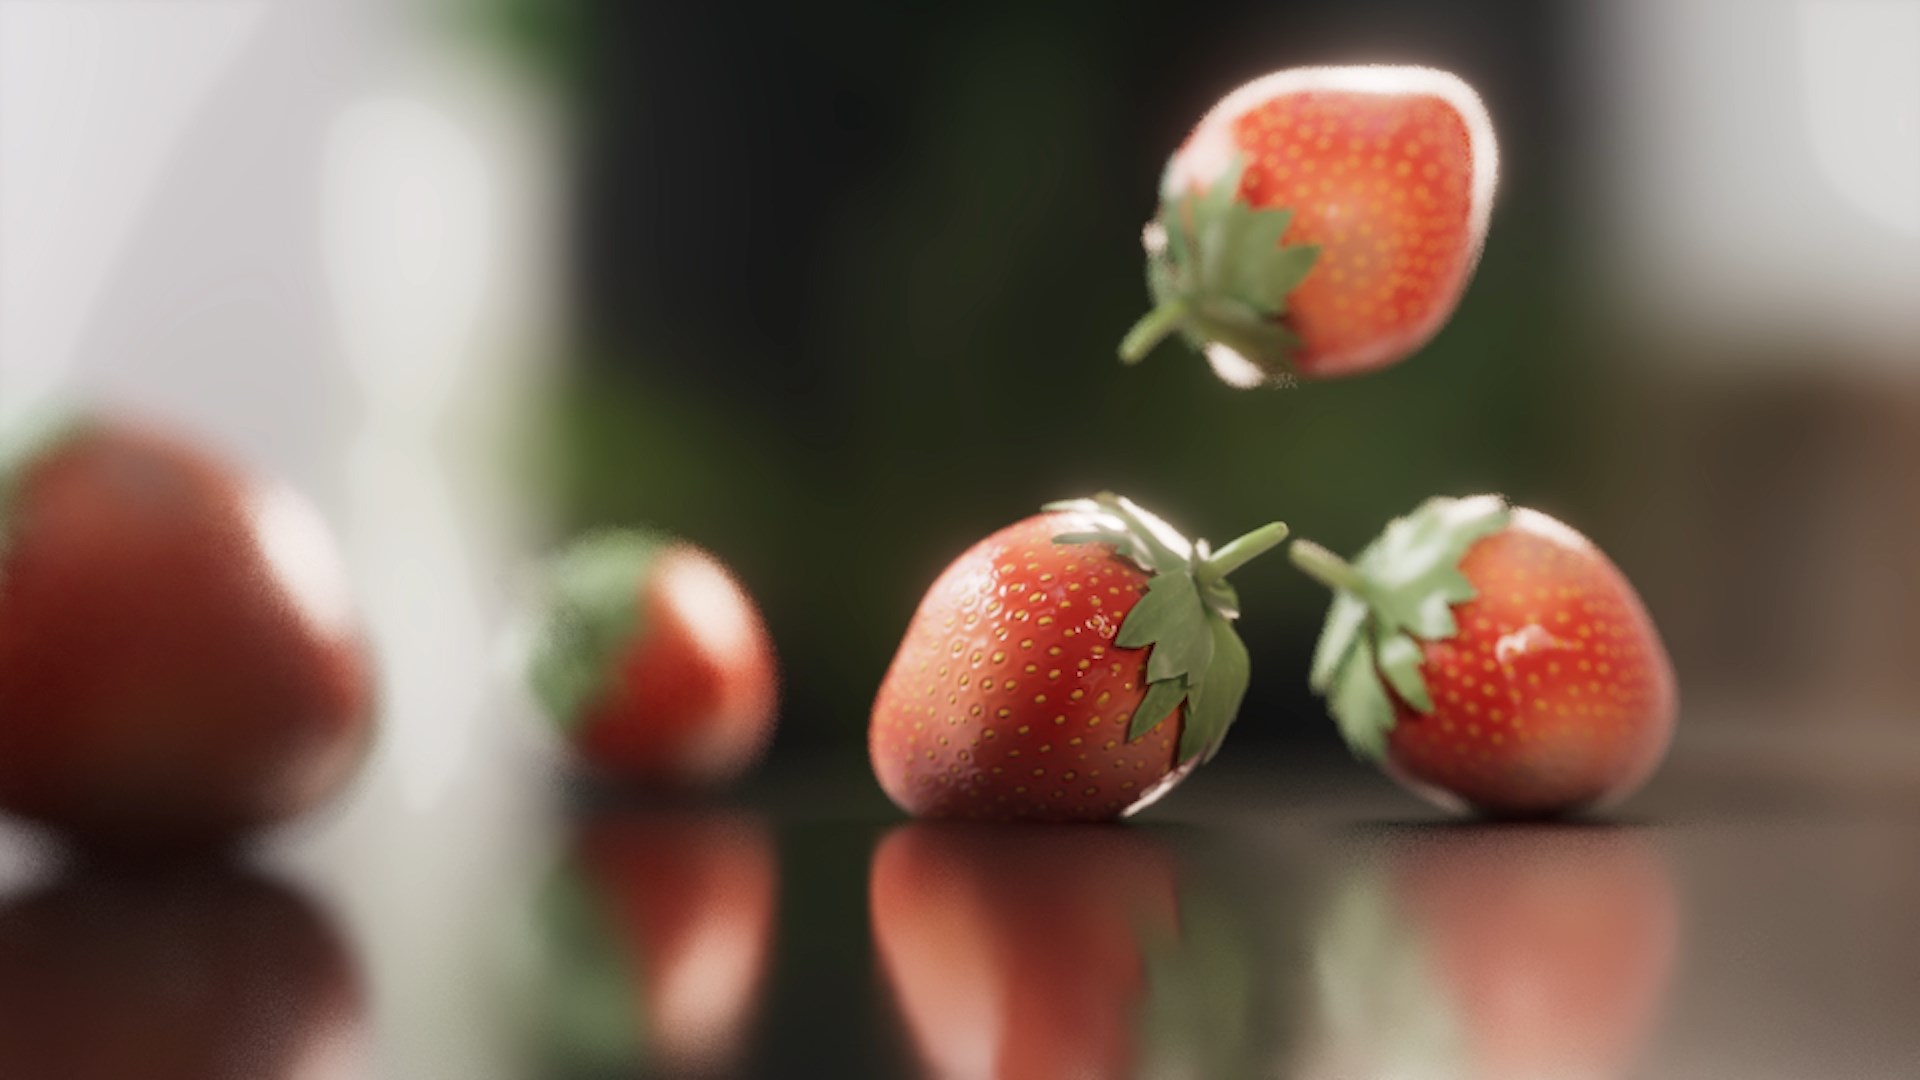 strawberry_chapter 01 modeling in zbrush core.mp4_snapshot_00.43.970